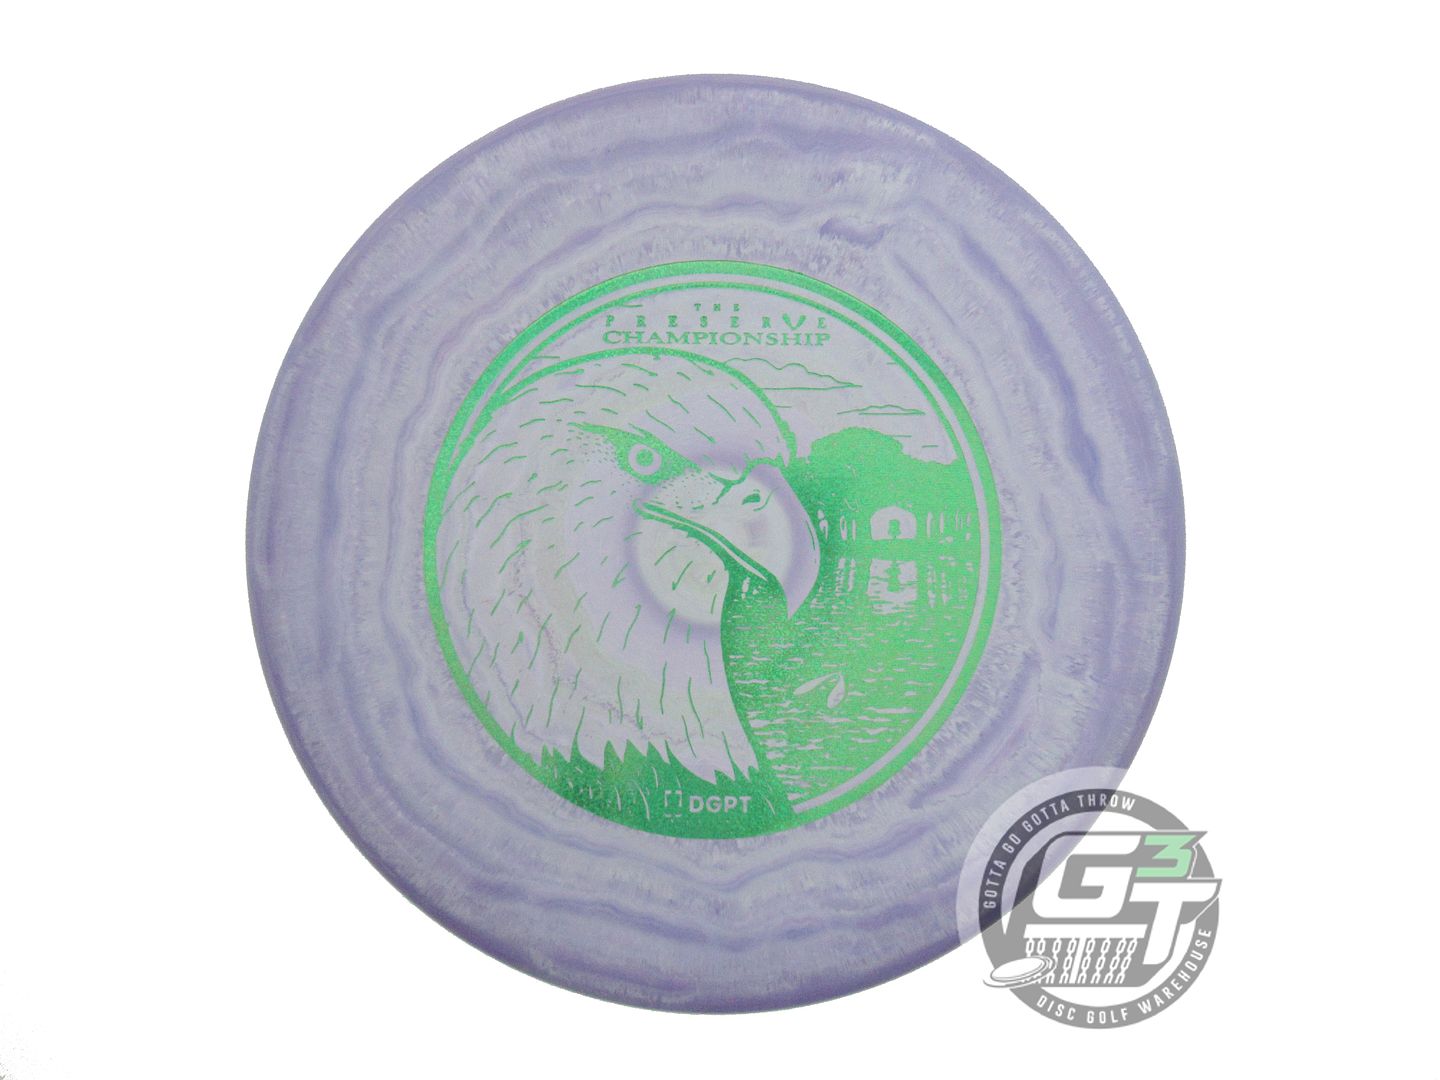 Prodigy LImited Edition Minnesota Preserve Championship Eagle Stamp 300 Soft Spectrum PA5 Putter Golf Disc (Individually Listed)